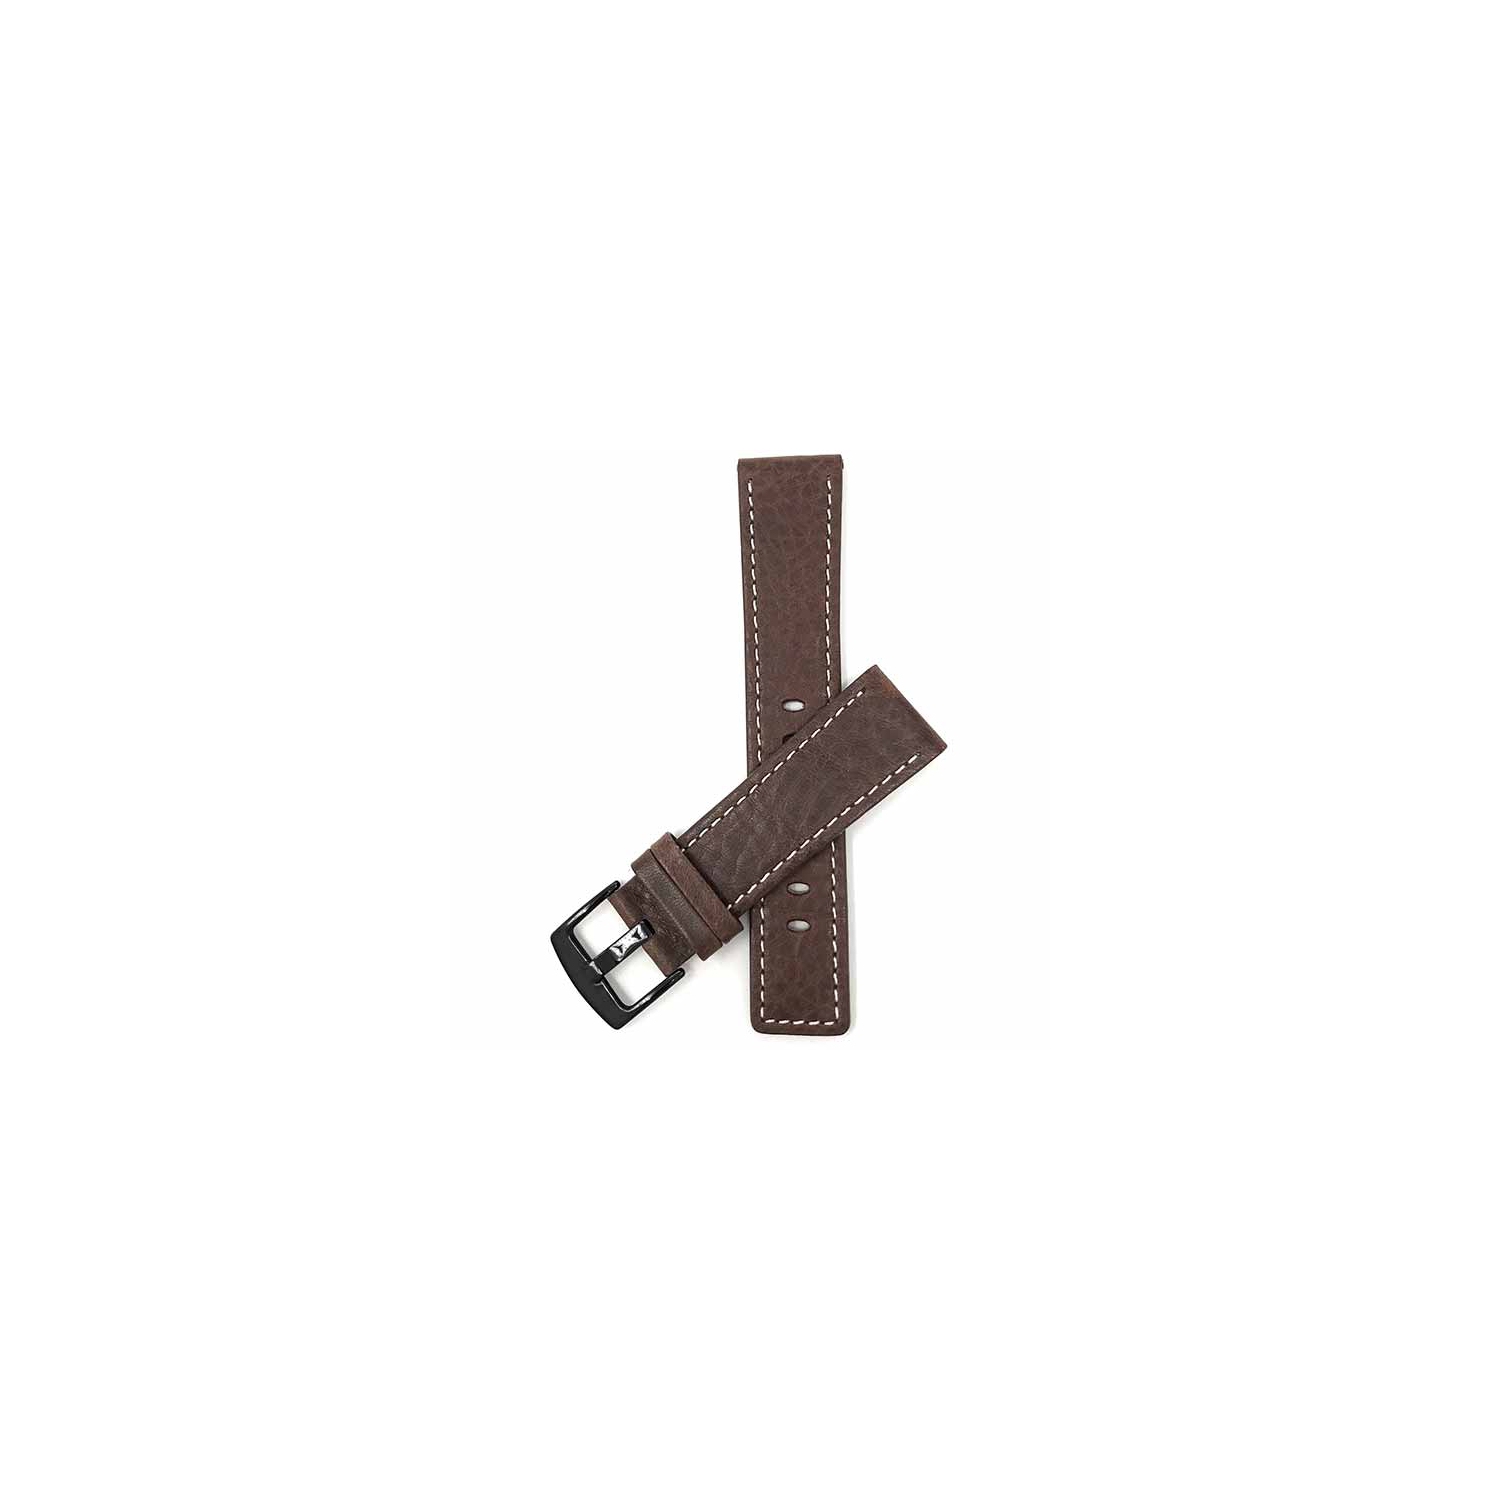 Bandini Square Tip Leather Smartwatch Strap, White Stitch For Oneplus Watch - 22mm, Brown / Black Buckle